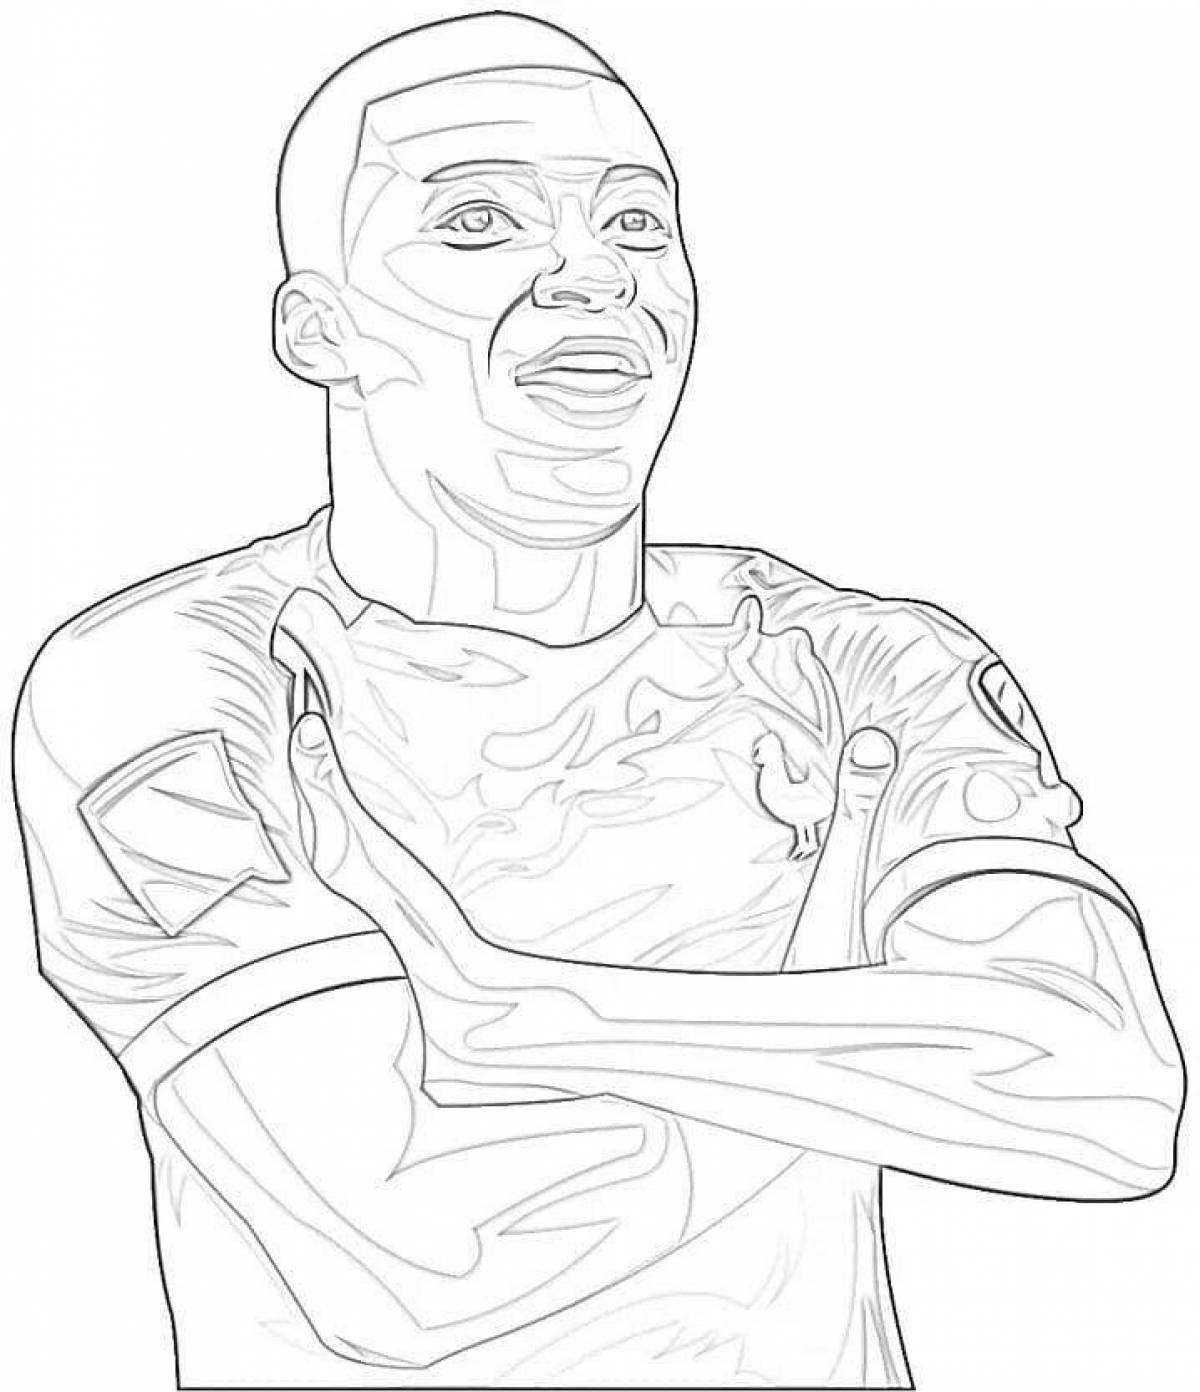 Coloring page playful football player